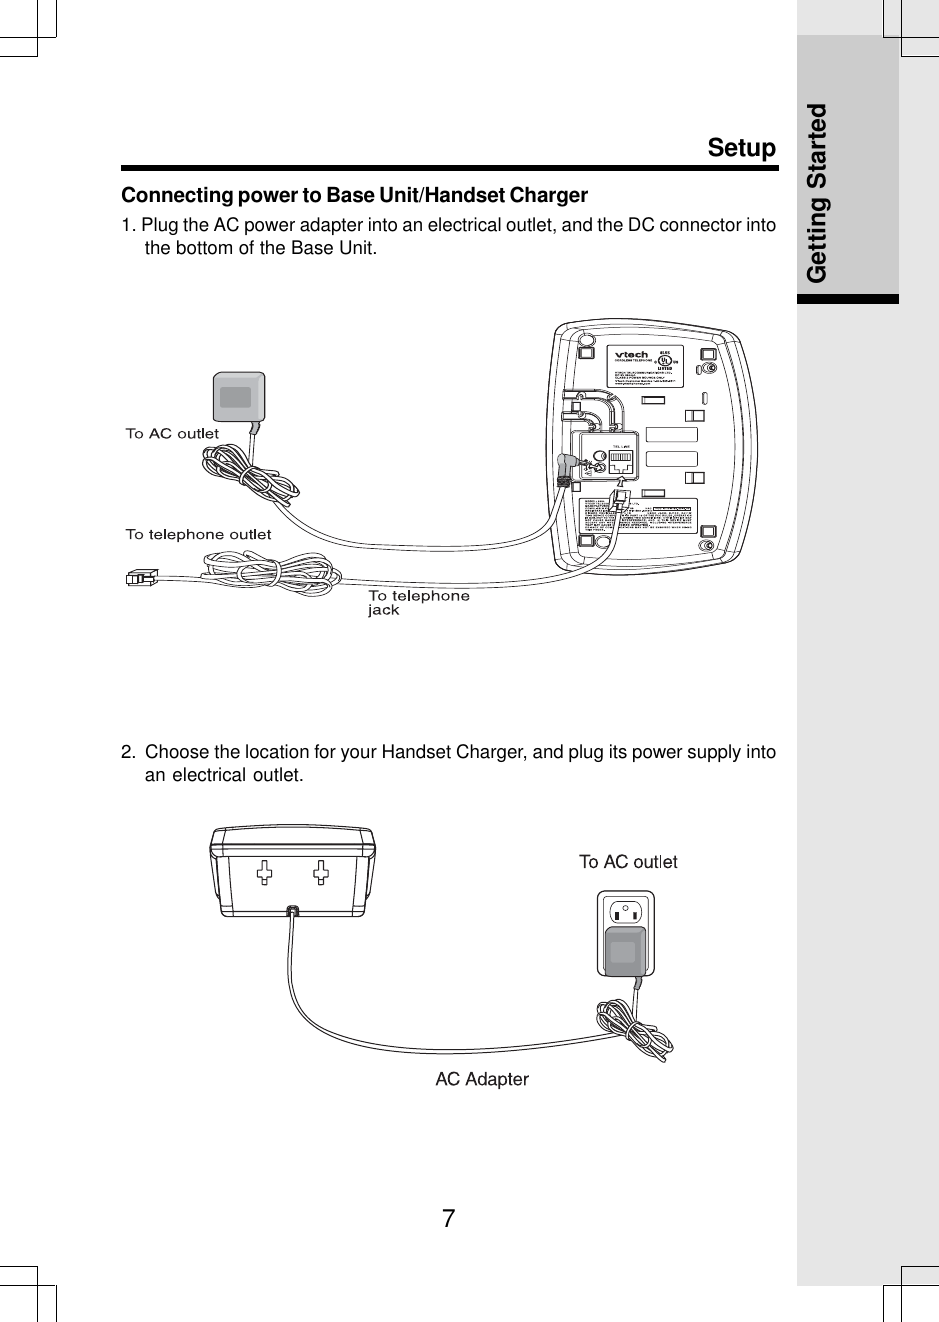 7Connecting power to Base Unit/Handset Charger1. Plug the AC power adapter into an electrical outlet, and the DC connector intothe bottom of the Base Unit.Setup2.  Choose the location for your Handset Charger, and plug its power supply intoan electrical outlet.Getting Started